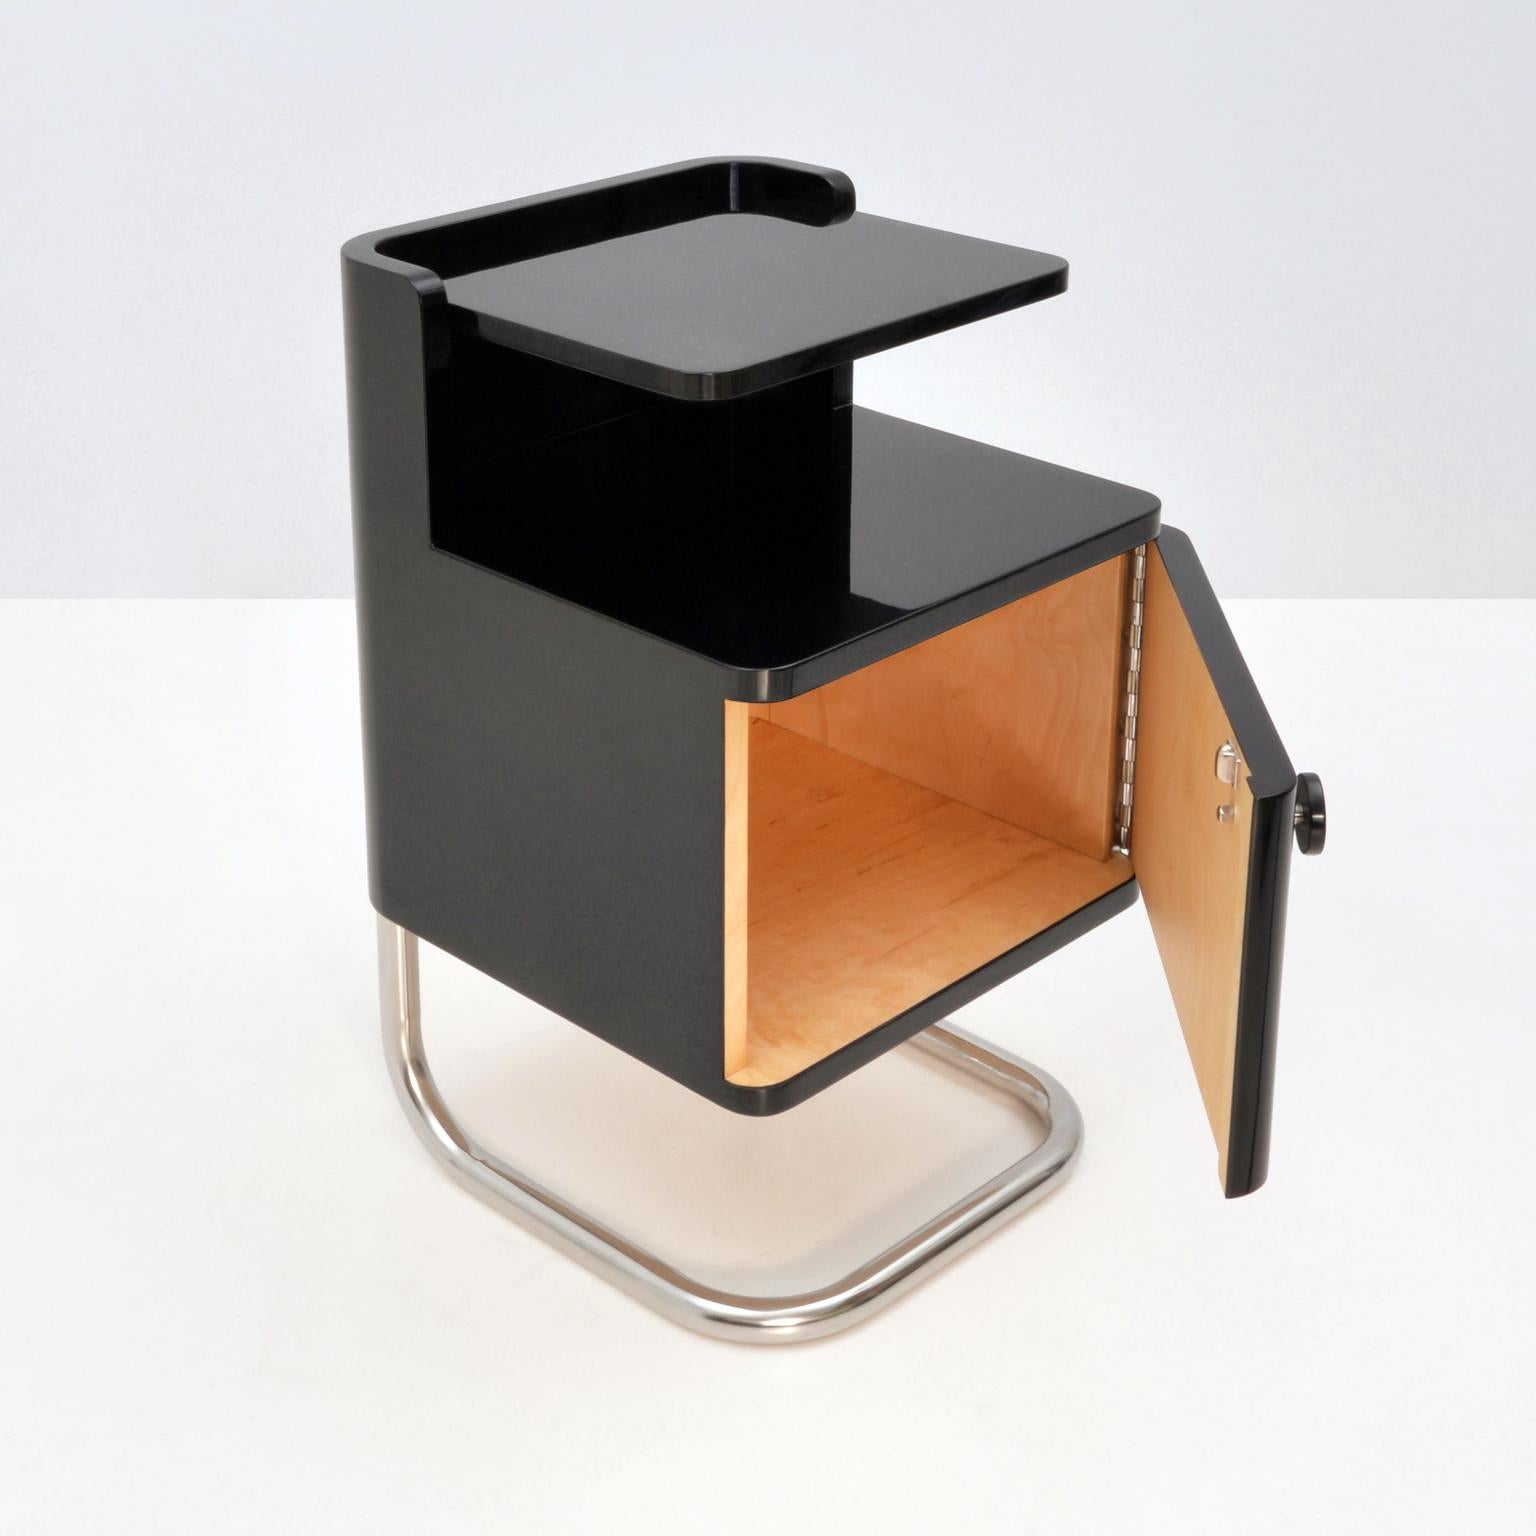 Modern Contemporary Customizable Nightstand, Handcrafted Wood, Tubular Steel In New Condition For Sale In Berlin, DE